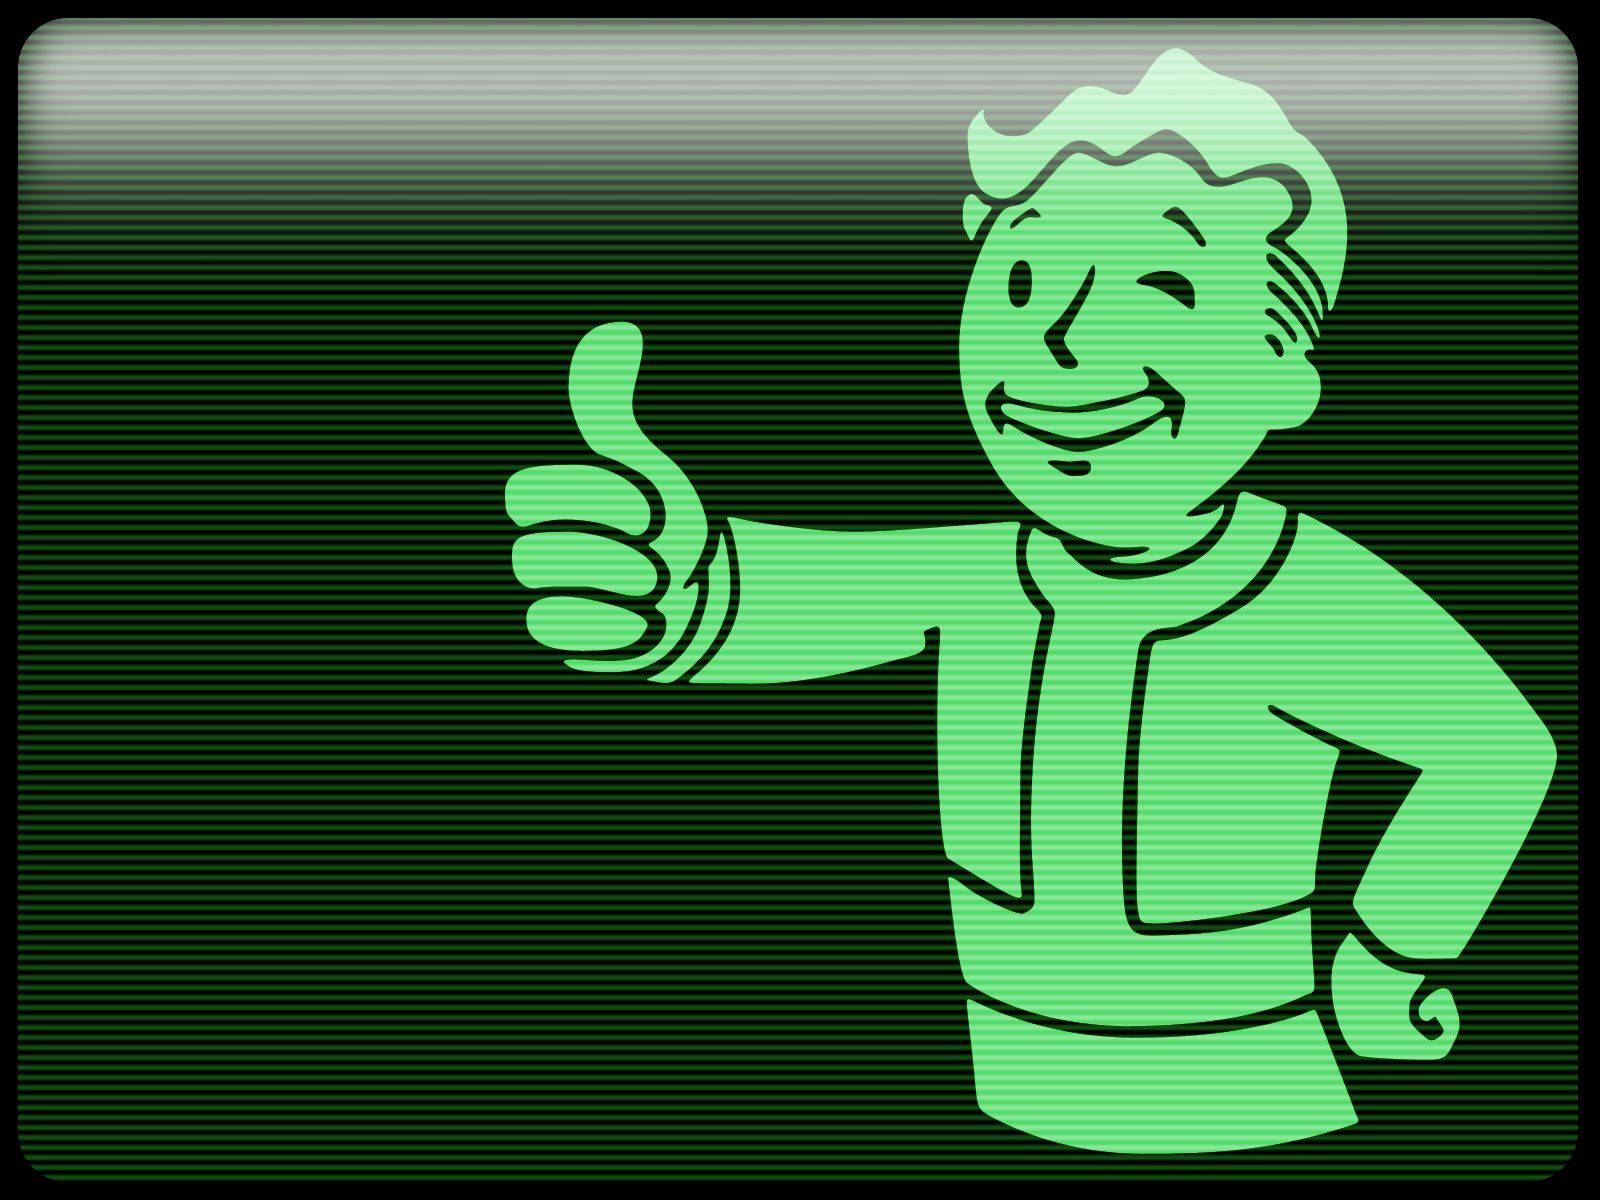 Vault Boy, the official icon of Fallout Wallpaper